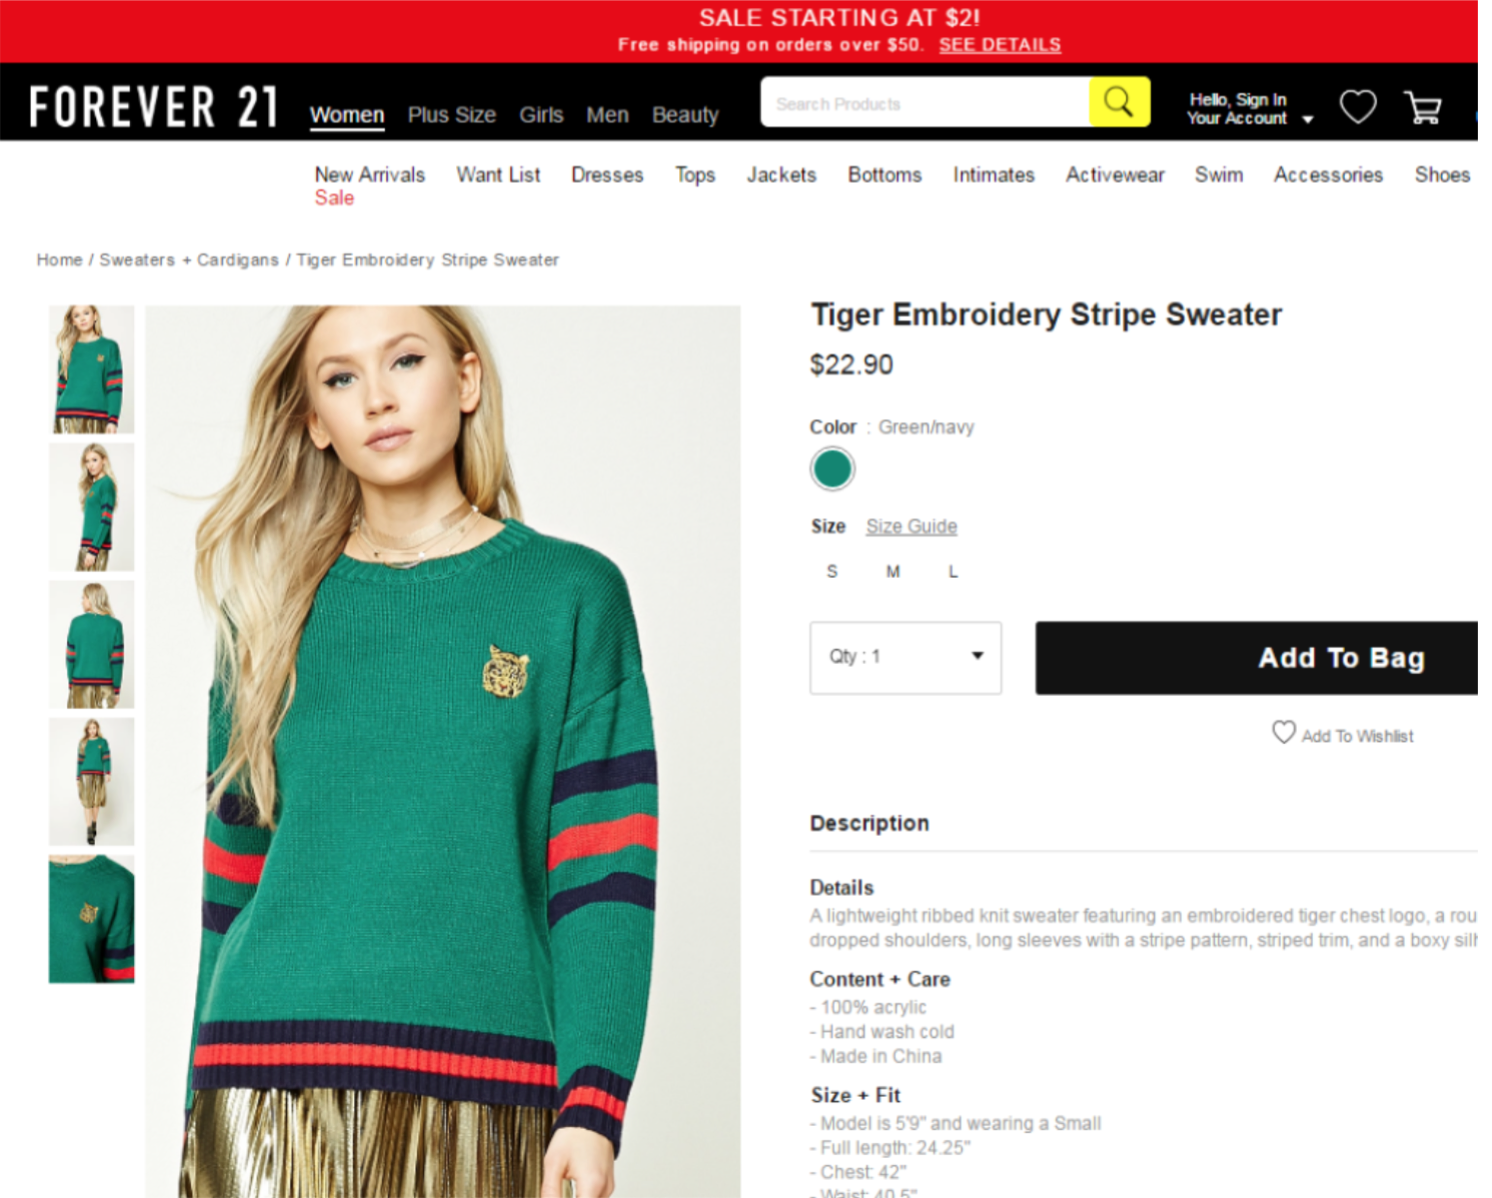  One of the allegedly infringing Forever 21 designs 